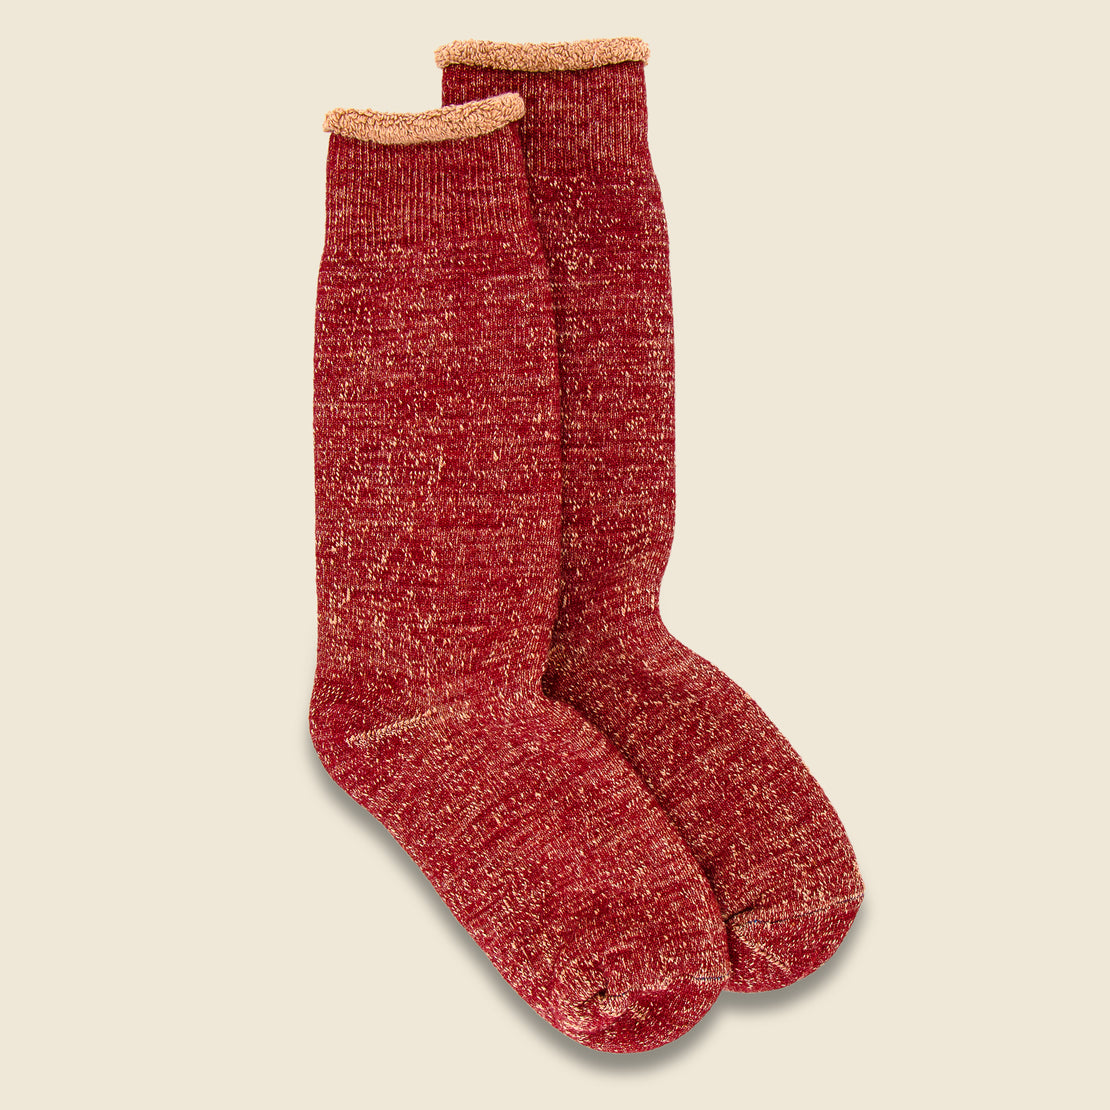 RoToTo Merino Wool & Cotton Double Face Sock - Dark Red/Brown